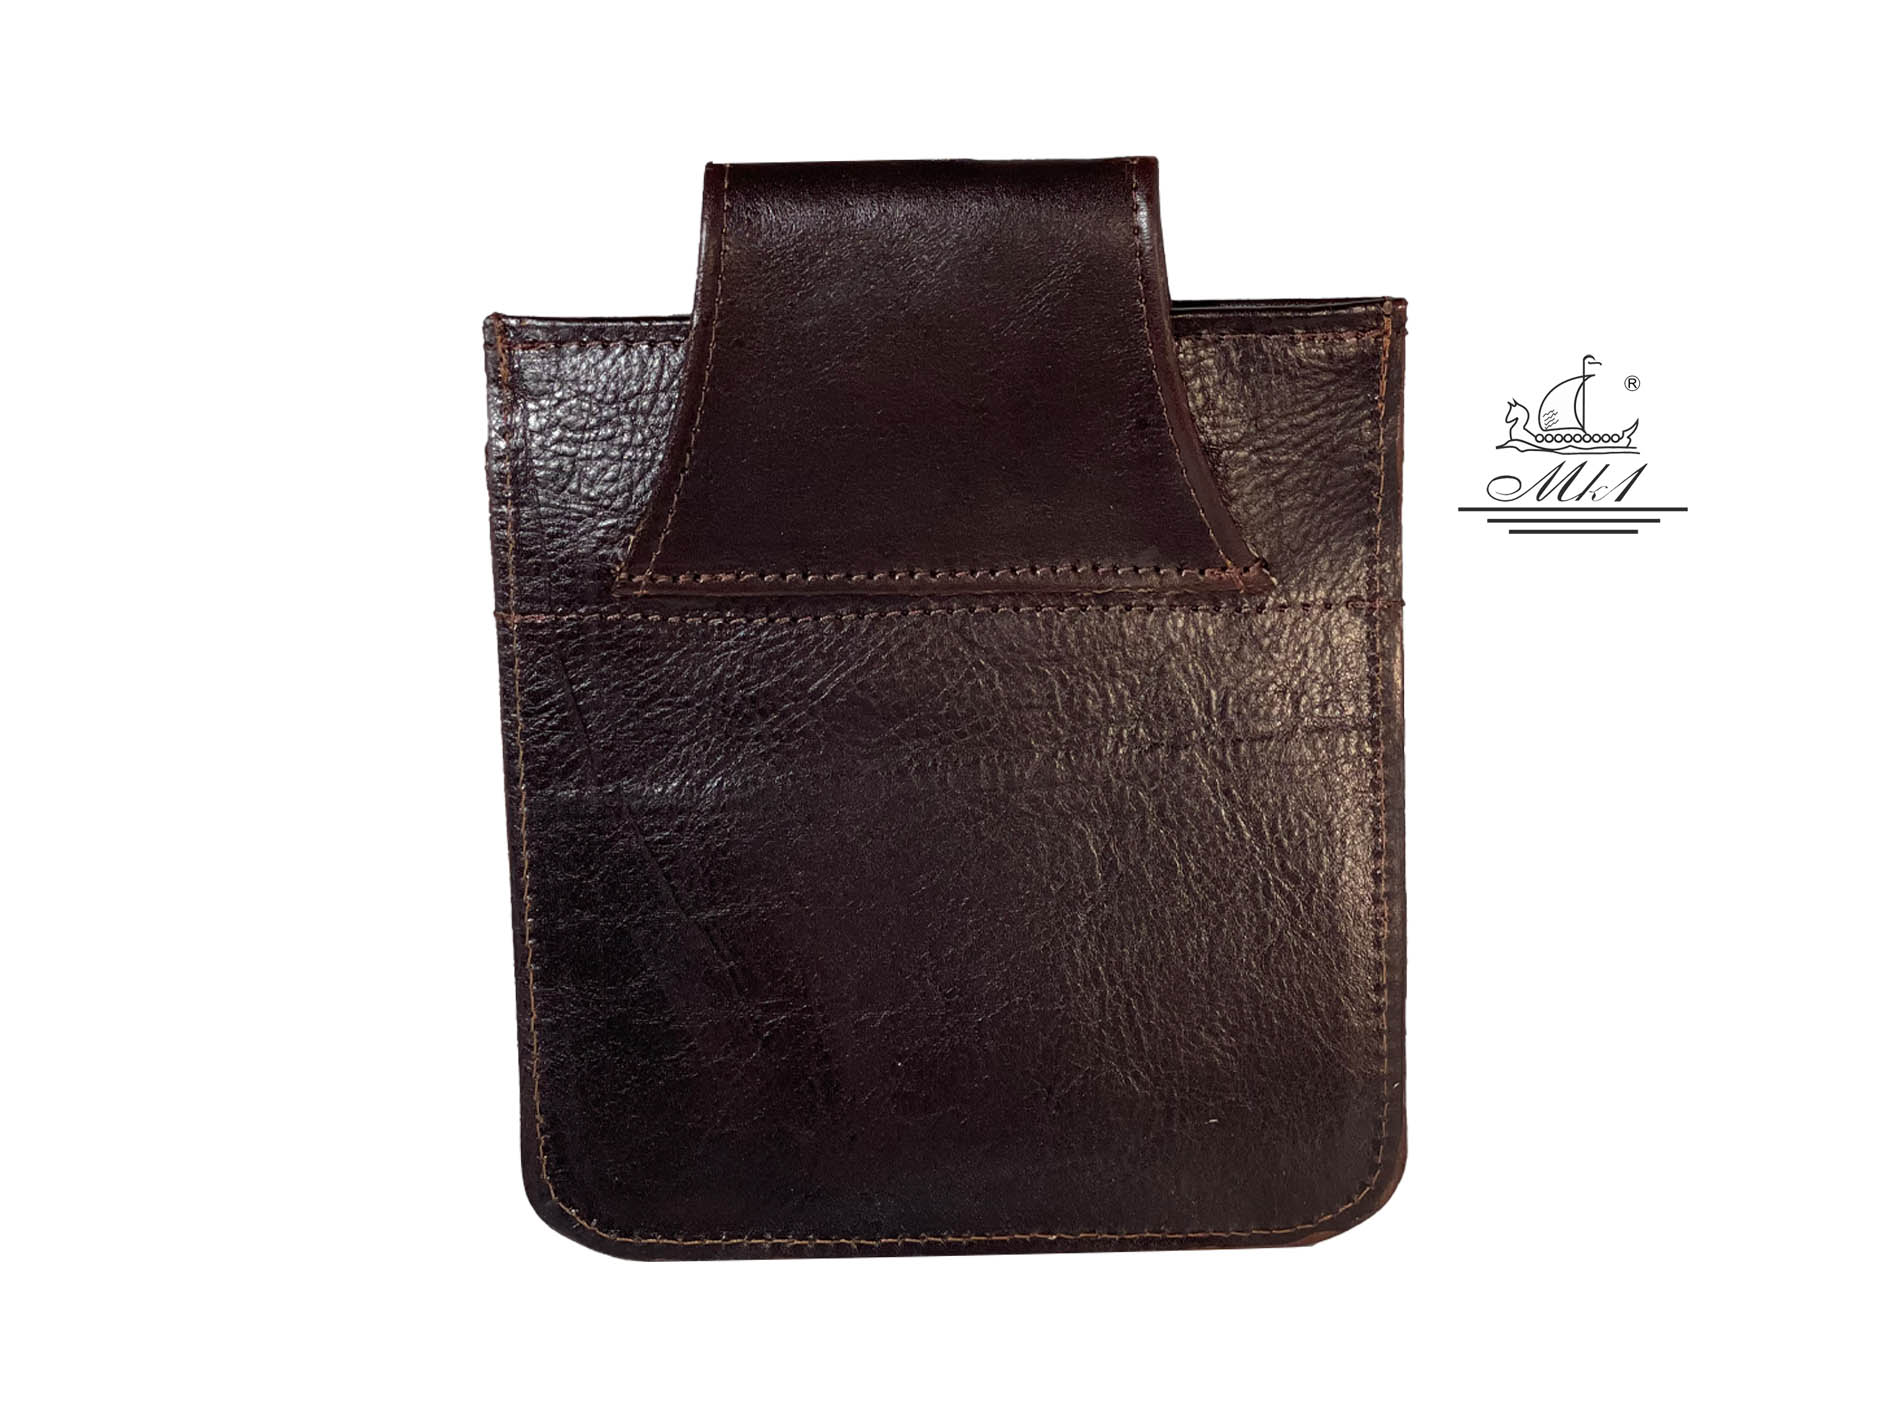 Waiter bag in brown leather WB2/3